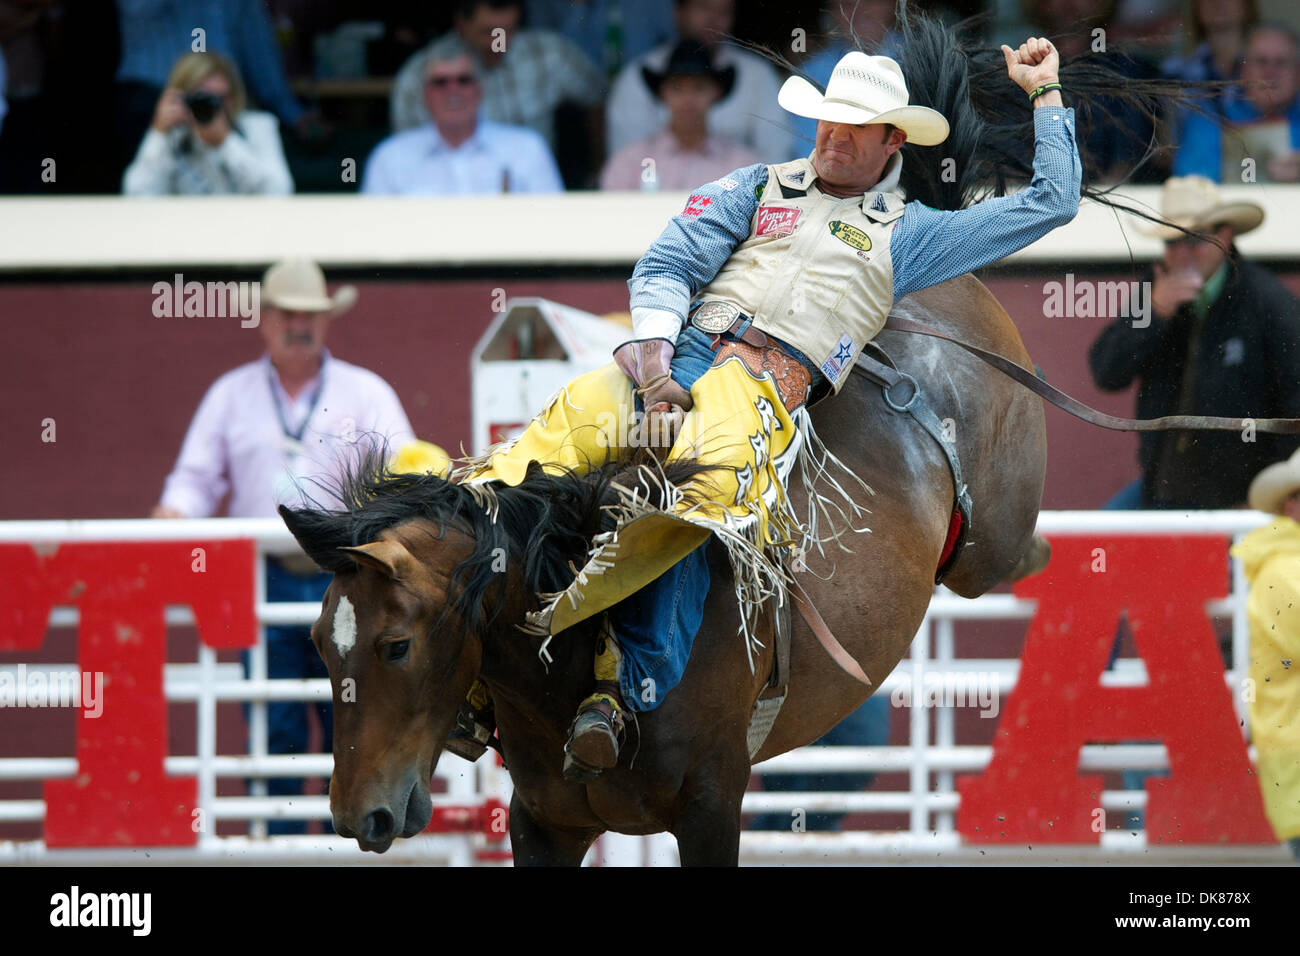 July 11, 2011 - Calgary, Alberta, Canada - Bareback rider Bobby Mote of Culver, OR rides Horse With No Name at the Calgary Stampede in Calgary, AB, Canada.  Mote finished 5th on the day with a score of 83.50. (Credit Image: © Matt Cohen/Southcreek Global/ZUMAPRESS.com) Stock Photo